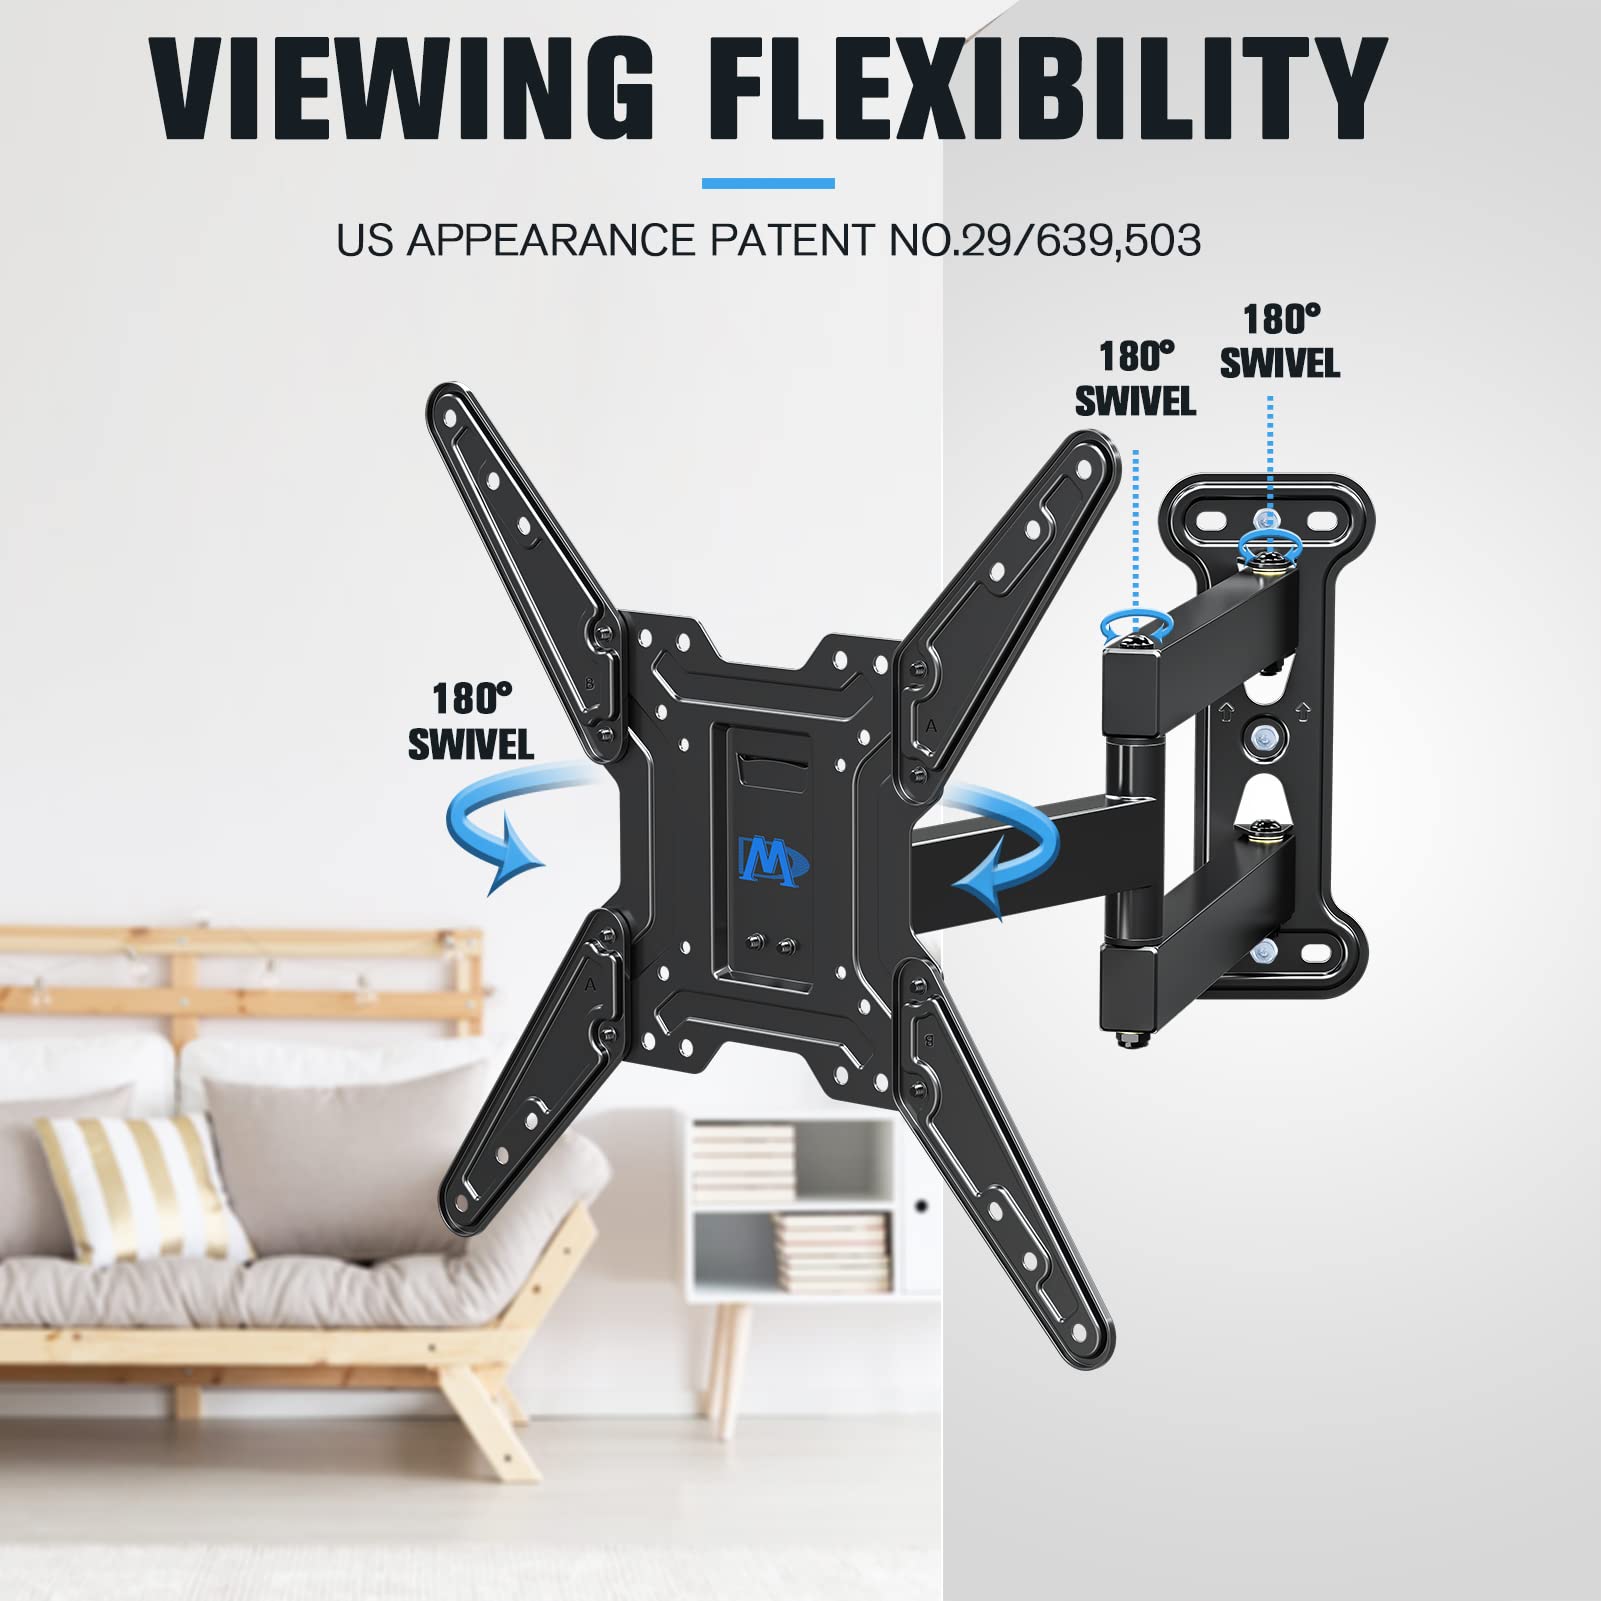 Mounting Dream TV Wall Mount Bracket for Most of 26-55 Inch LED, LCD, OLED and Plasma Flat Screen TV with Full Motion Swivel Articulating Arm up to VESA 400x400mm and 60 lbs, MD2393-MX